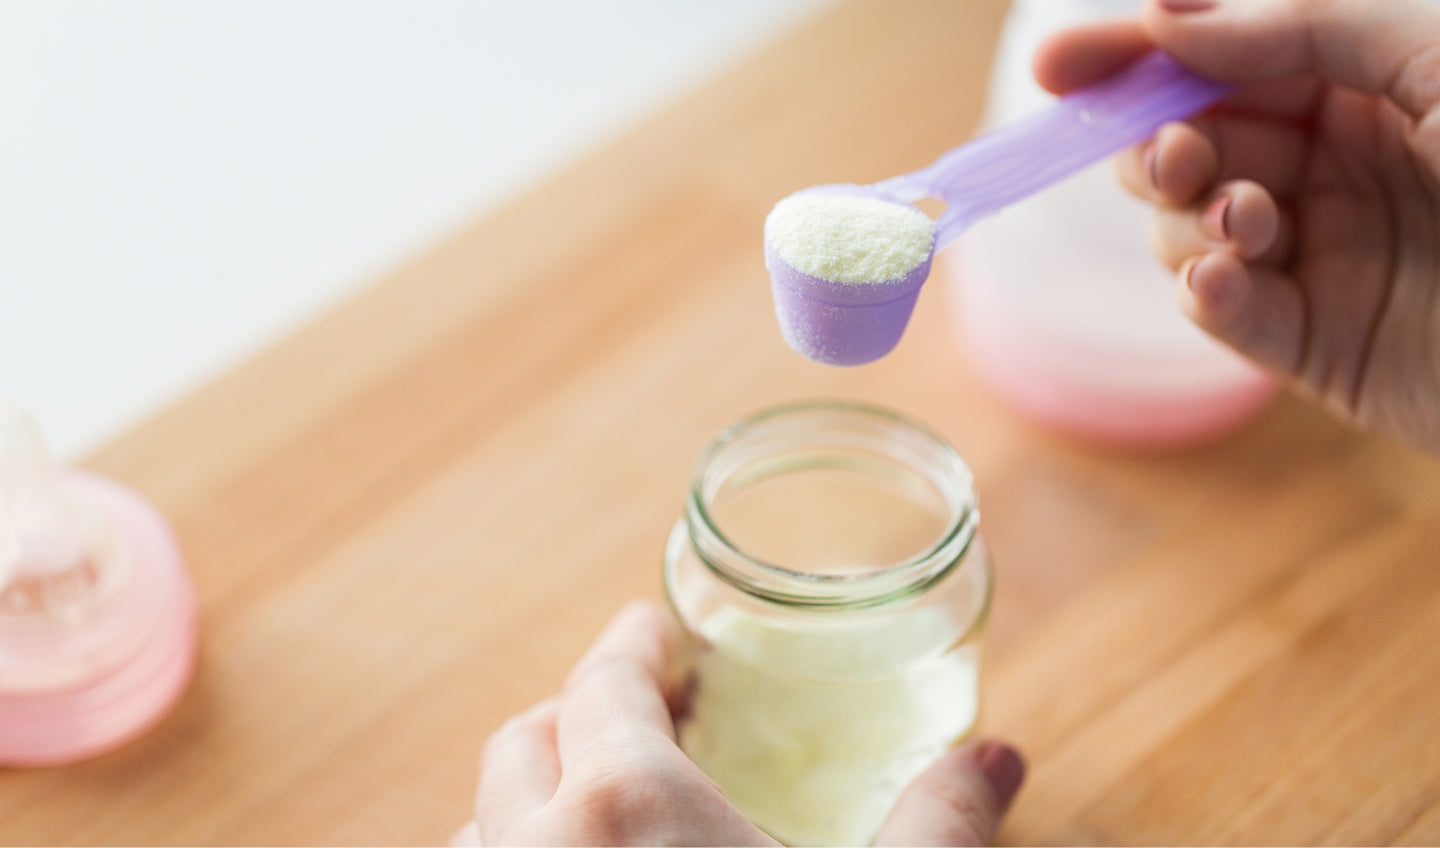 Step-By-Step Guide to Prepare Baby Formula